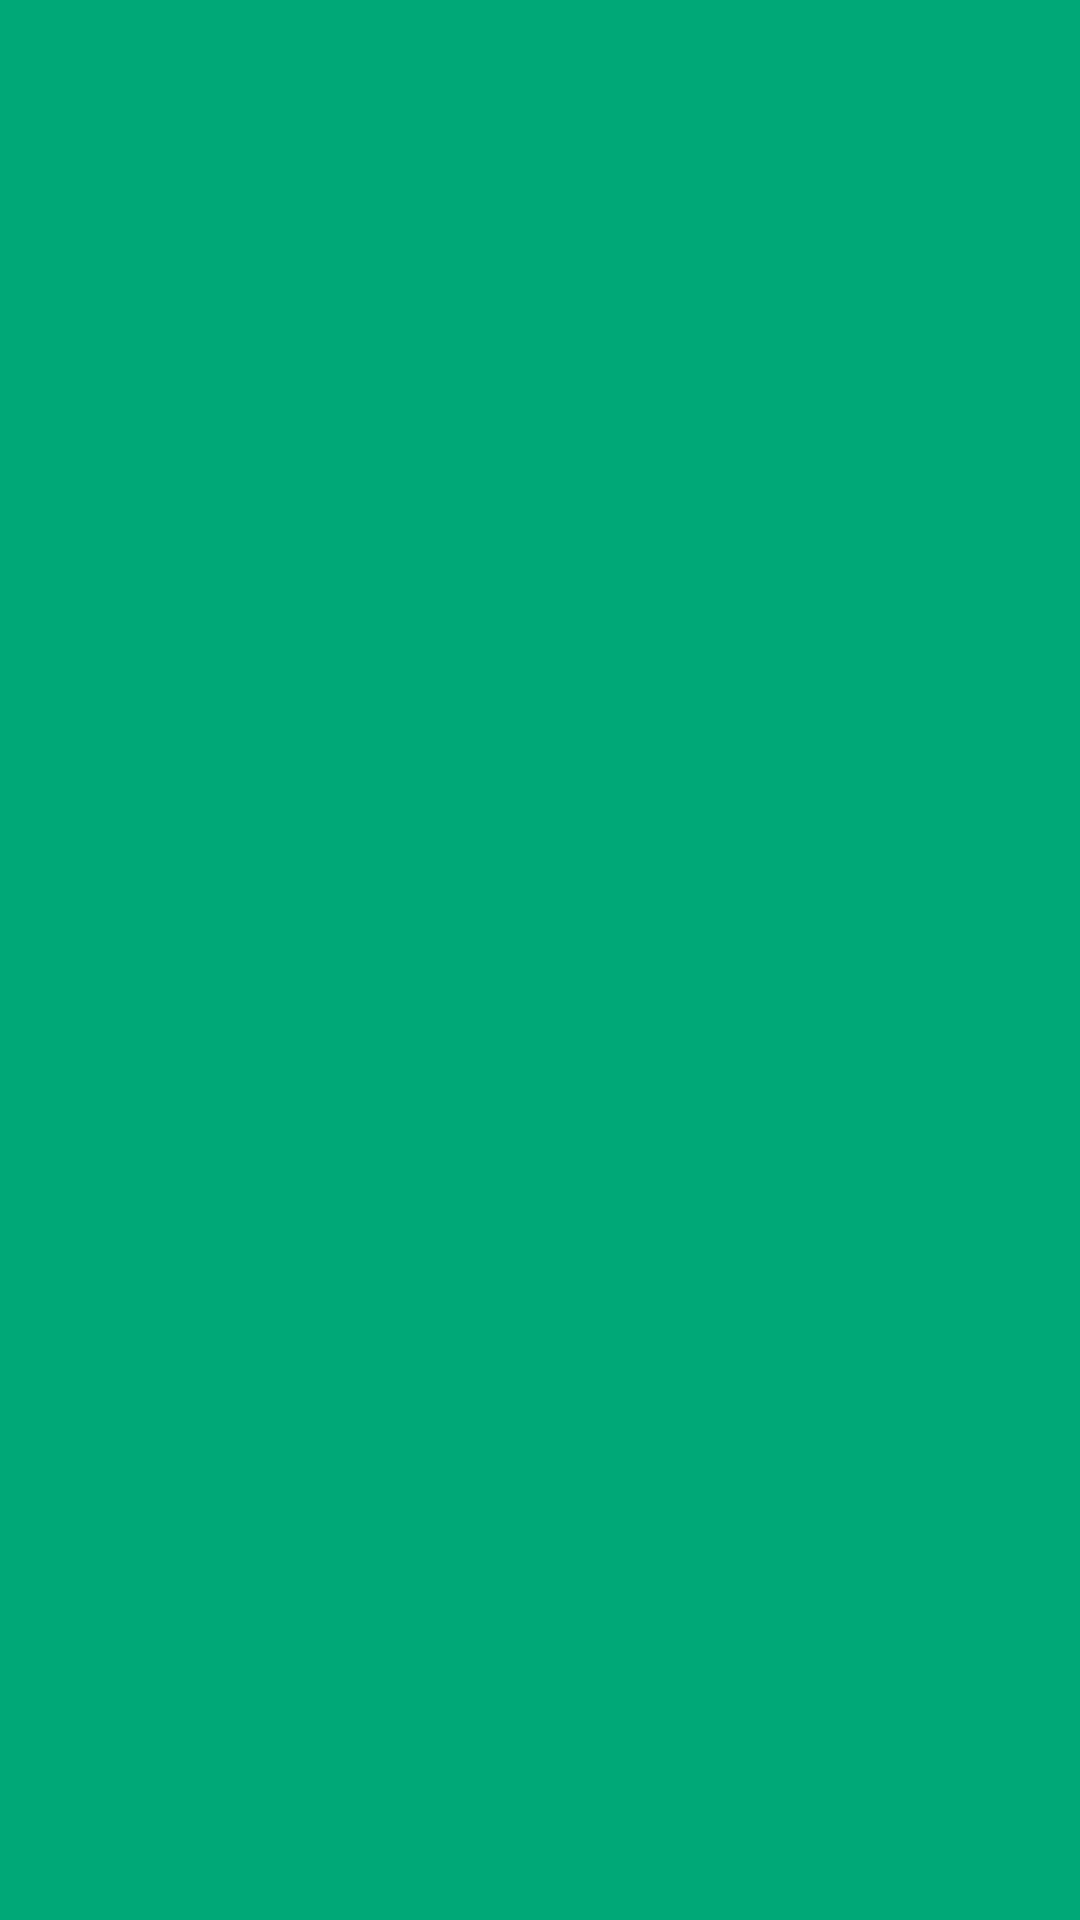 1080x1920 Green Munsell Solid Color Background